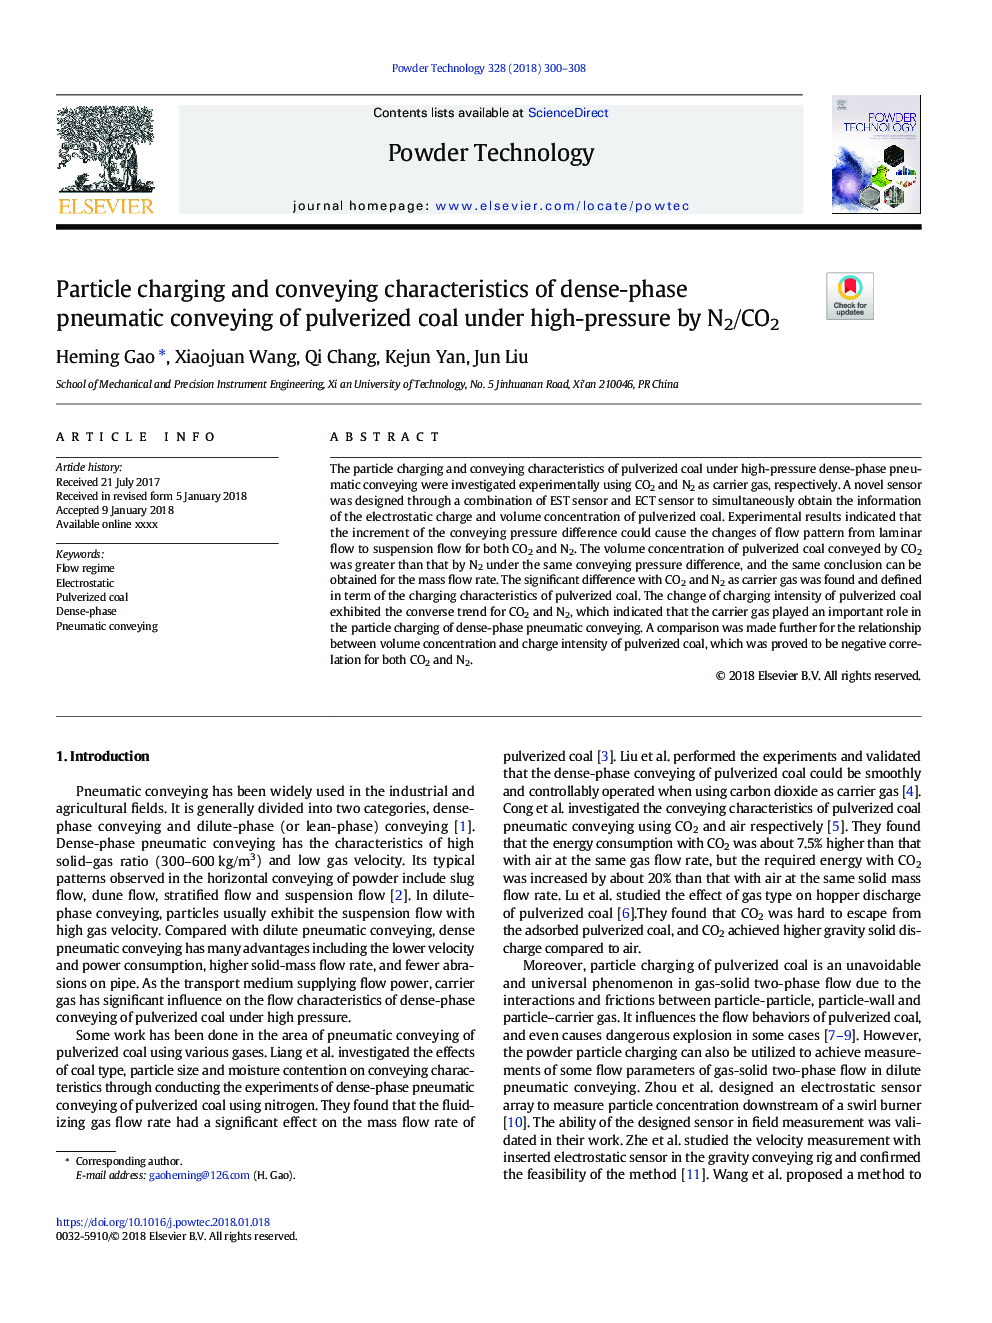 Particle charging and conveying characteristics of dense-phase pneumatic conveying of pulverized coal under high-pressure by N2/CO2